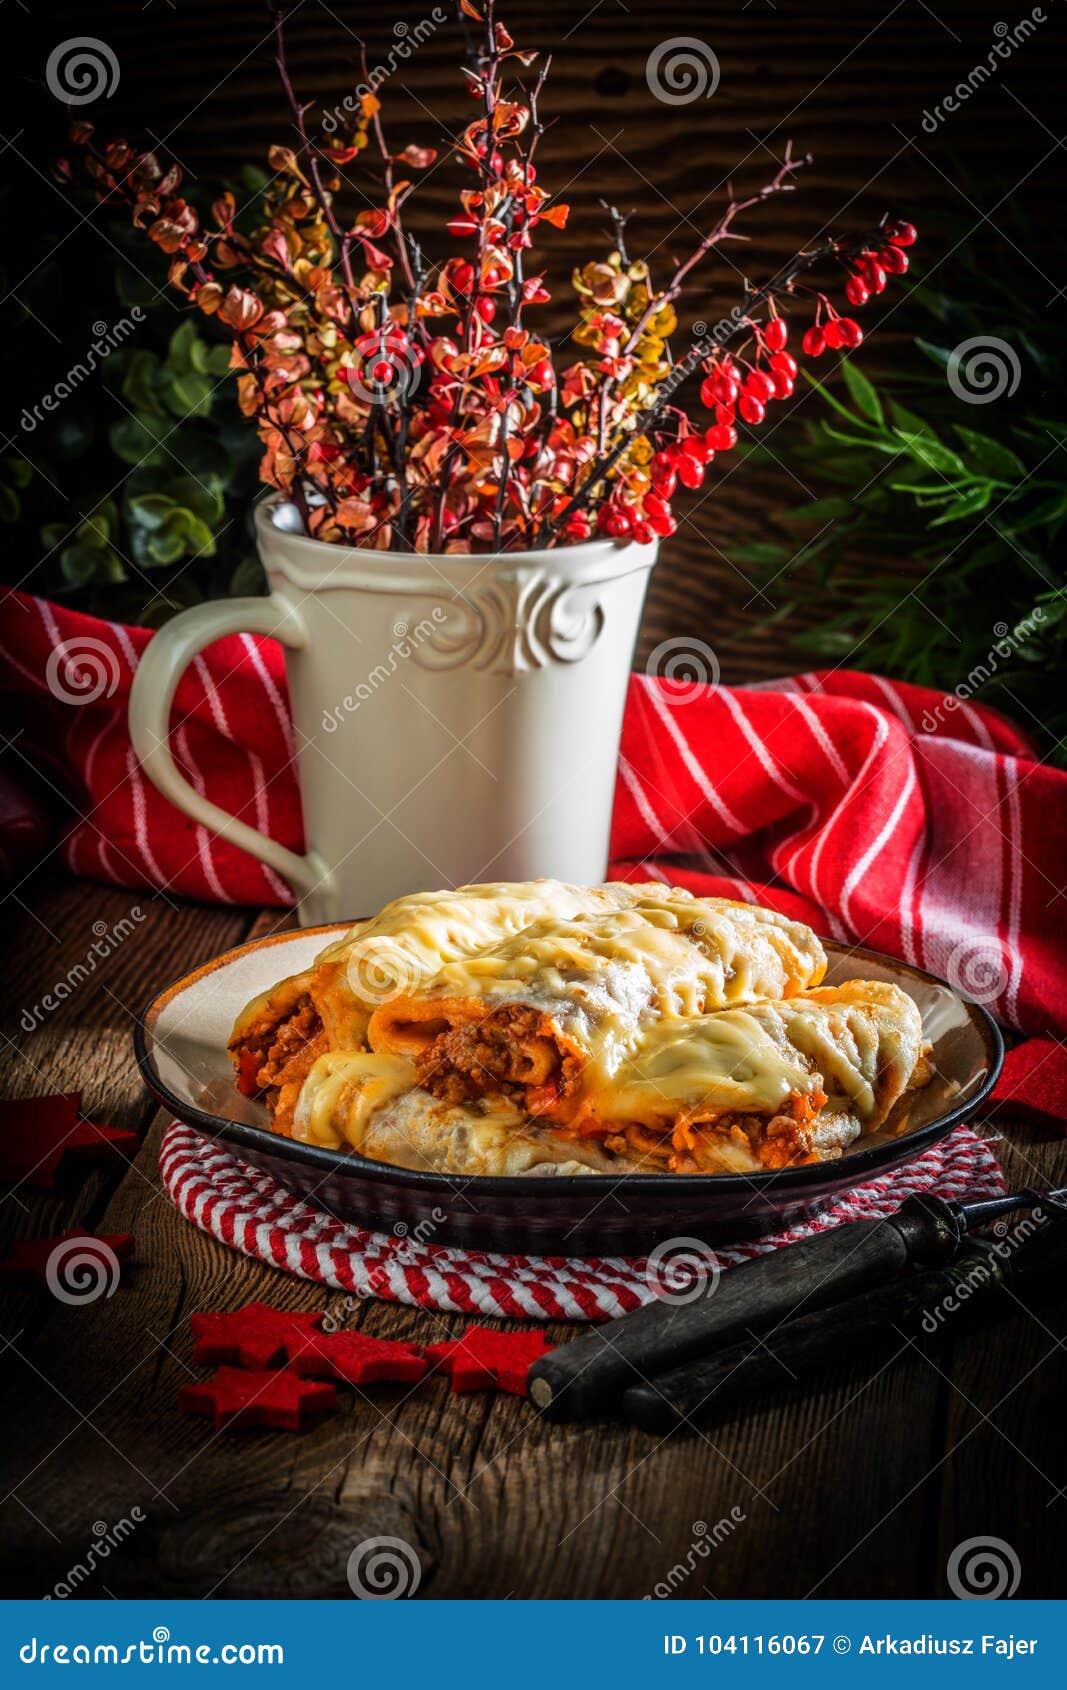 Italian Lasagna Rolls on a Plate. Stock Image - Image of minced, plate ...